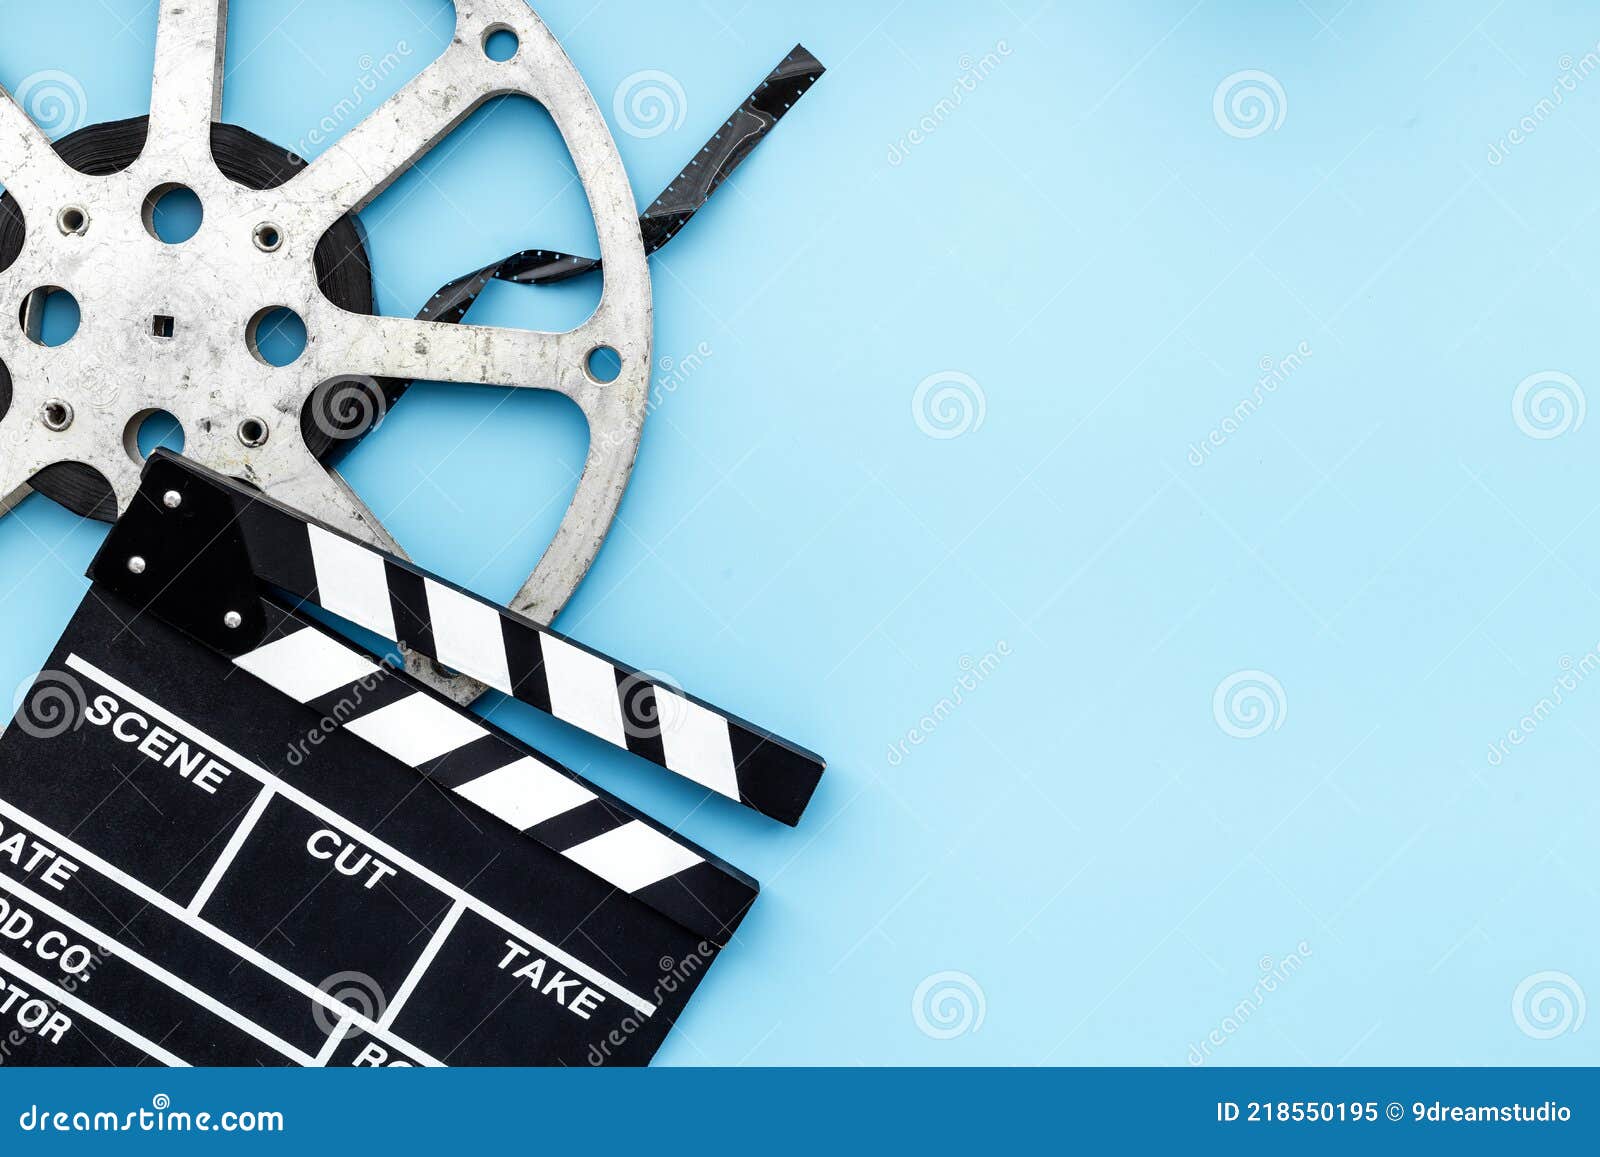 Film movie Background - Clapperboard And Film Reels In Theater Stock Photo  by ©rfphoto 154863440